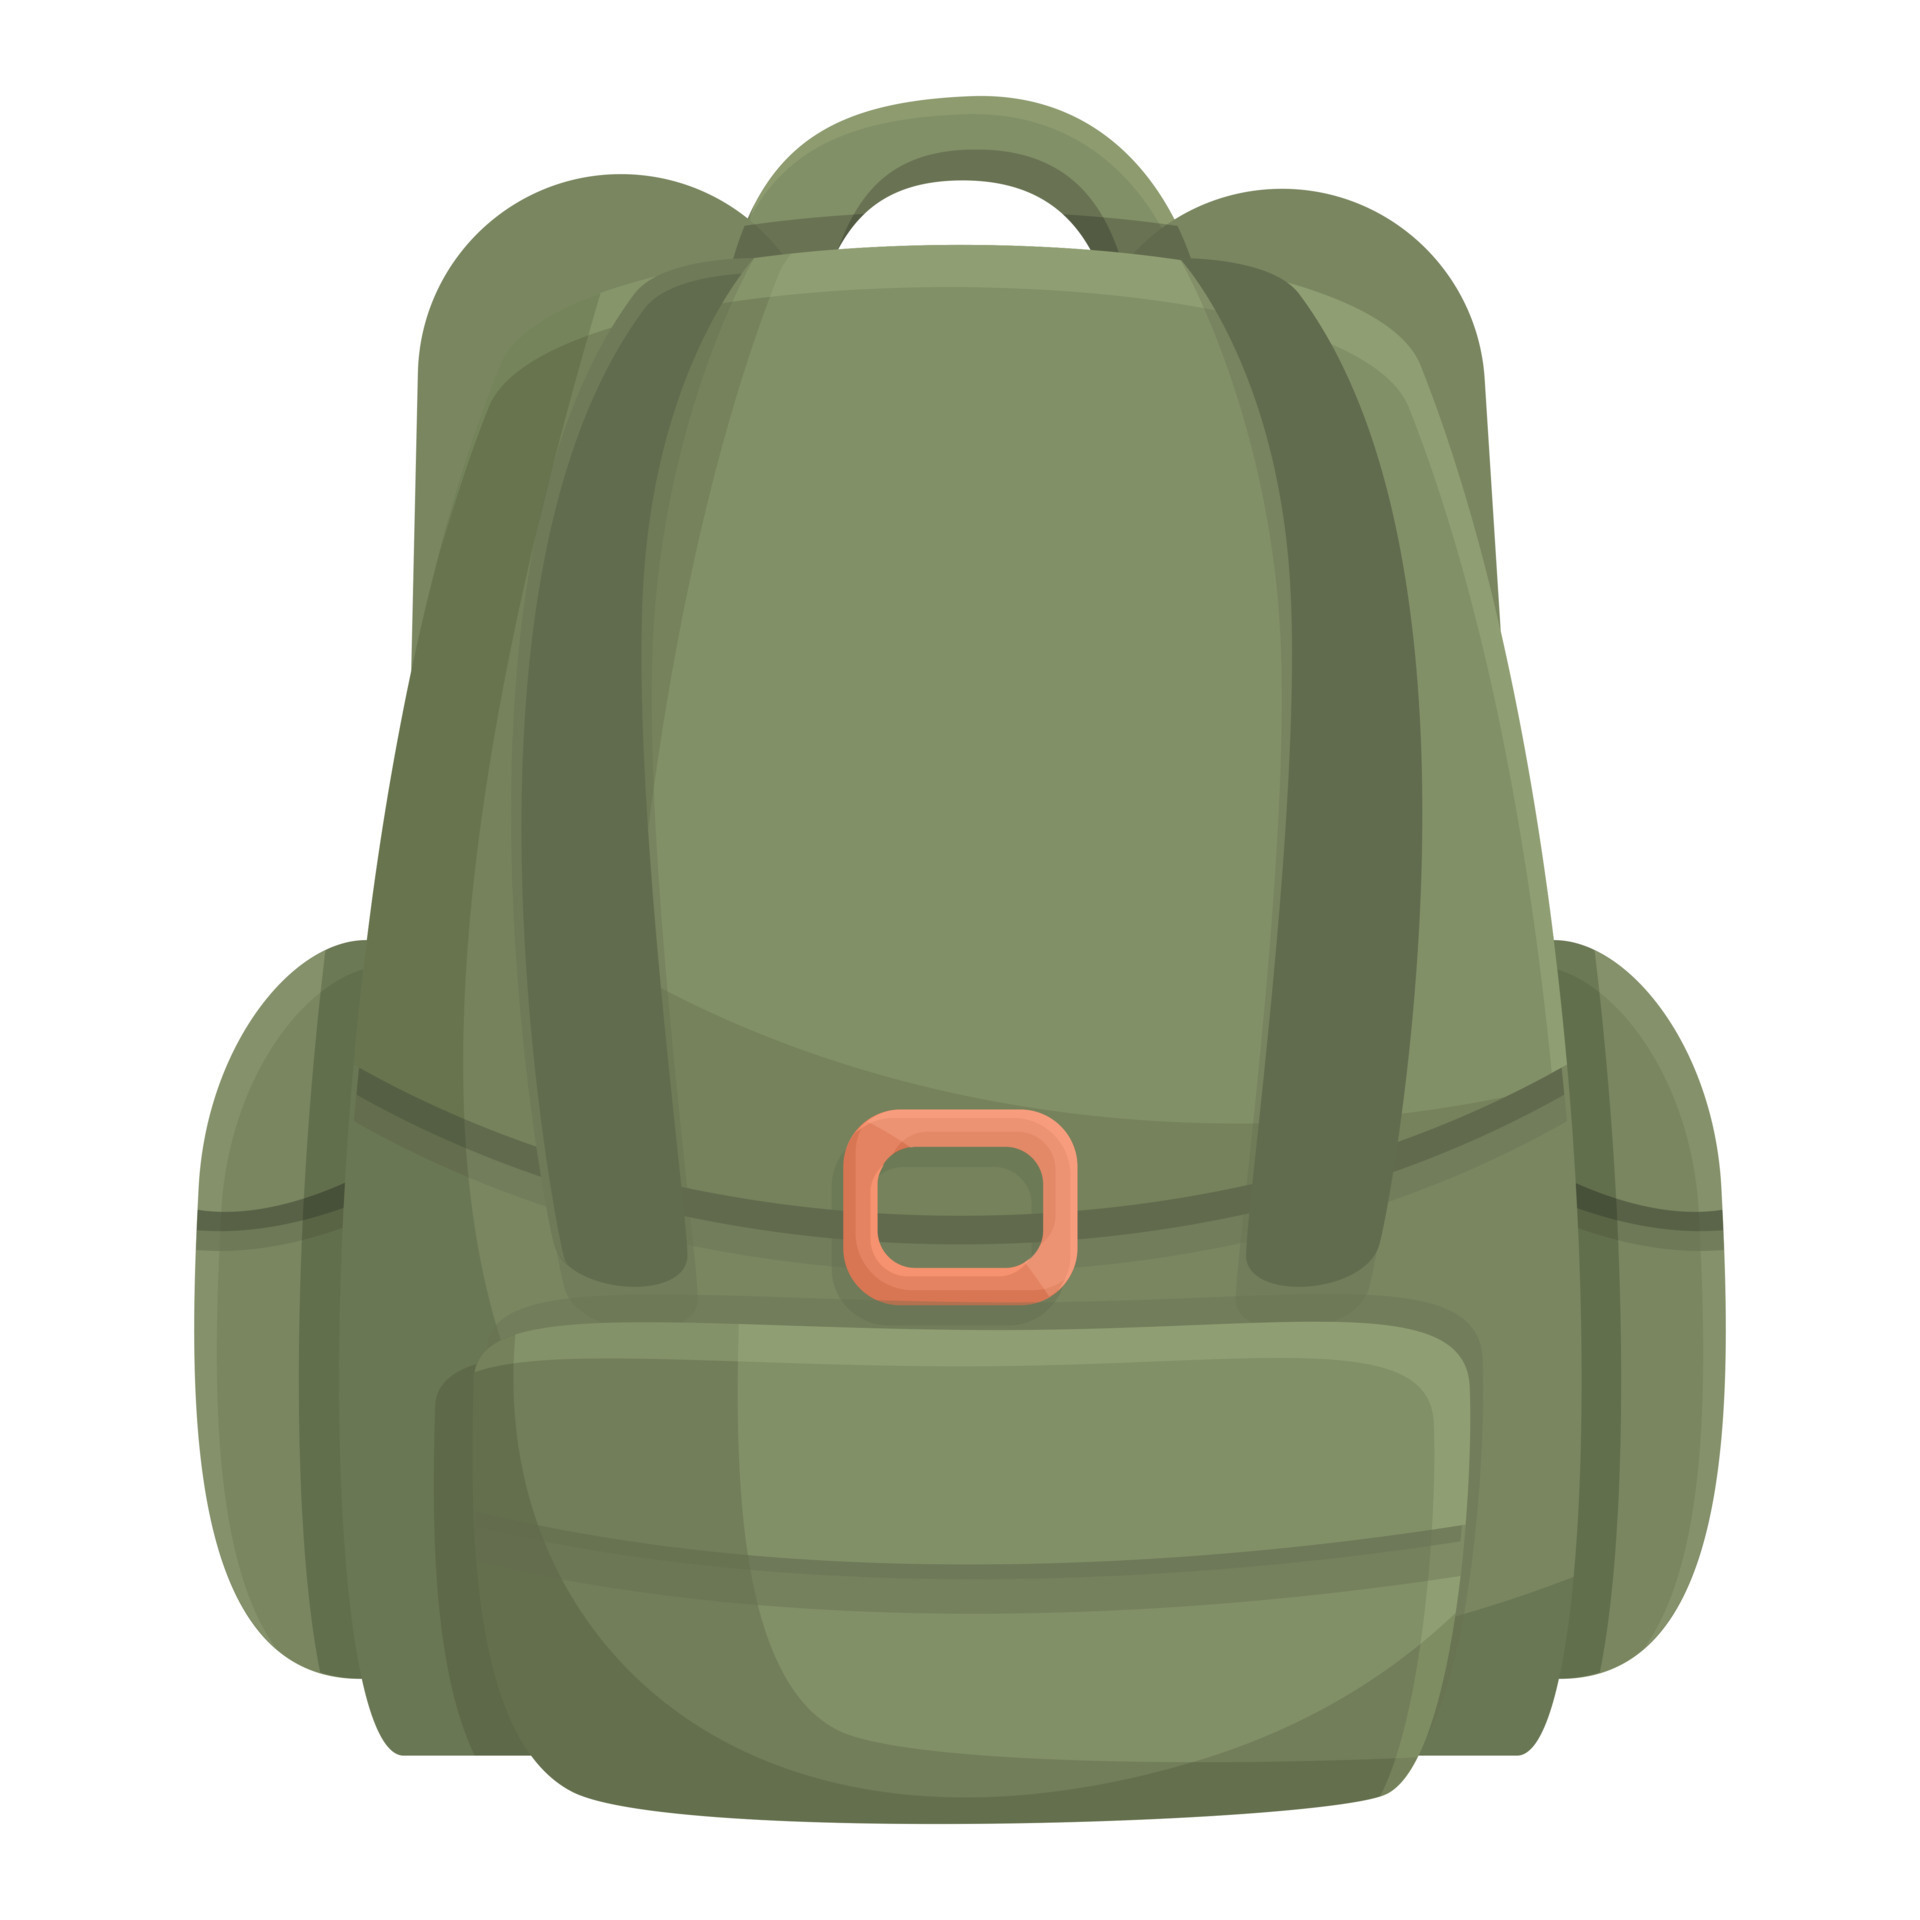 https://static.vecteezy.com/system/resources/previews/014/341/226/original/ice-fishing-backpack-icon-cartoon-winter-fish-vector.jpg